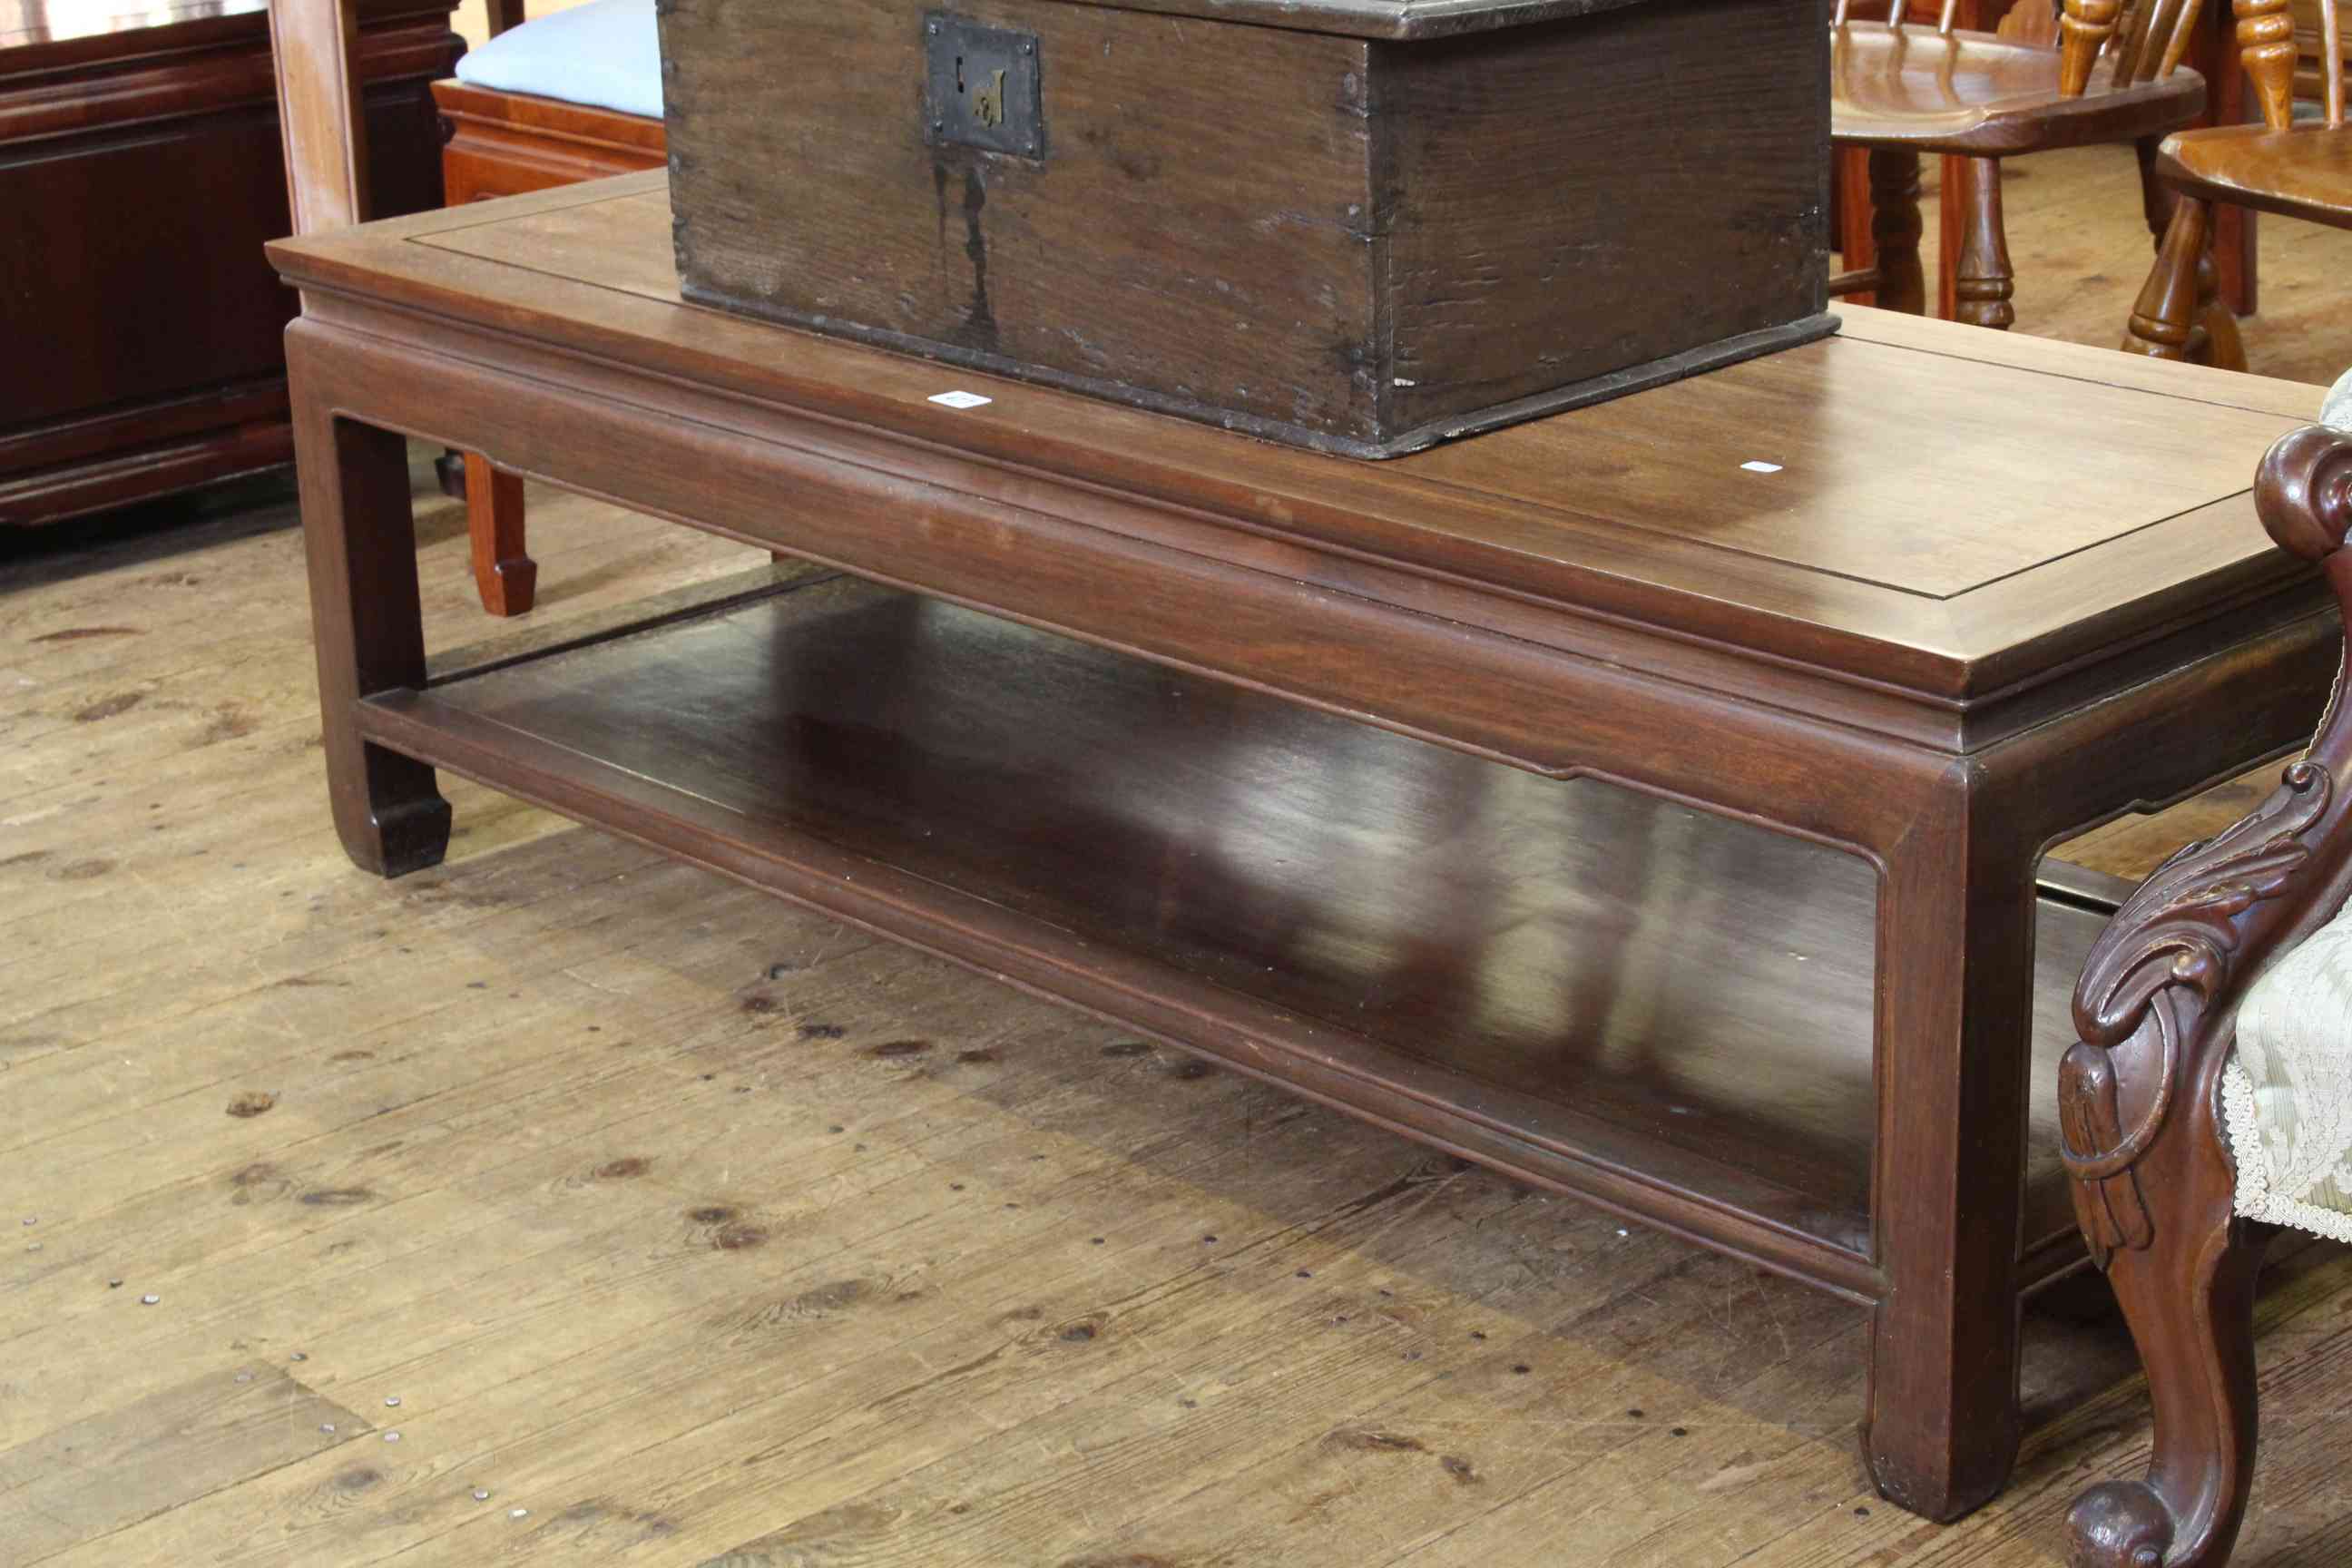 Chinese style rosewood rectangular coffee table, 43cm by 137cm.